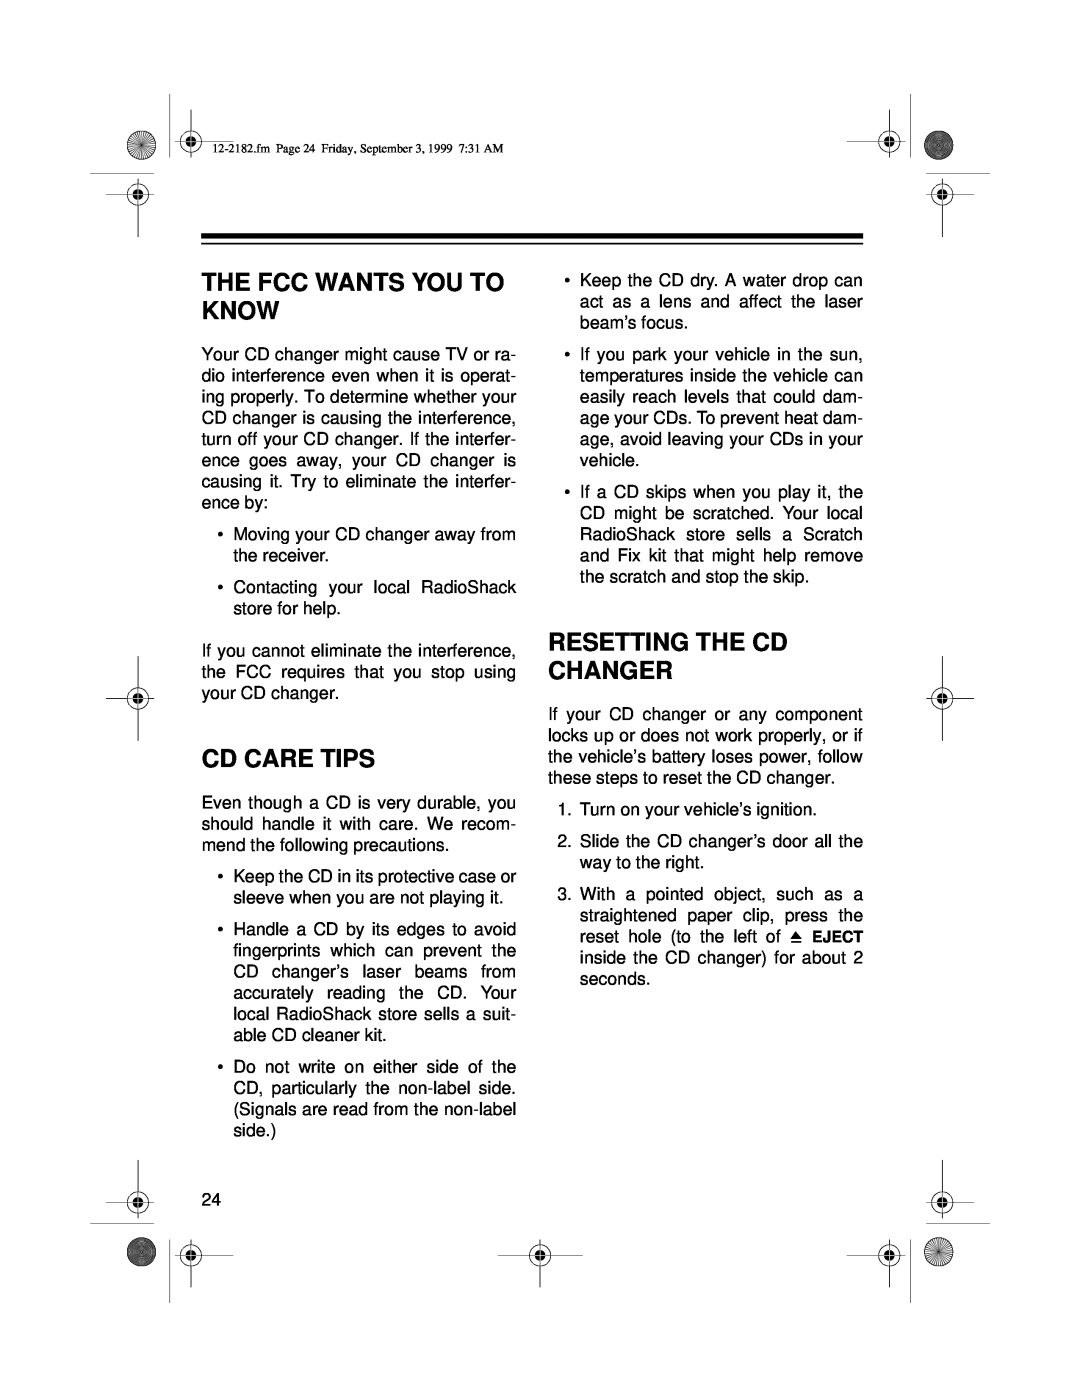 Radio Shack 10 Disc CD Changer owner manual The Fcc Wants You To Know, Cd Care Tips, Resetting The Cd Changer 